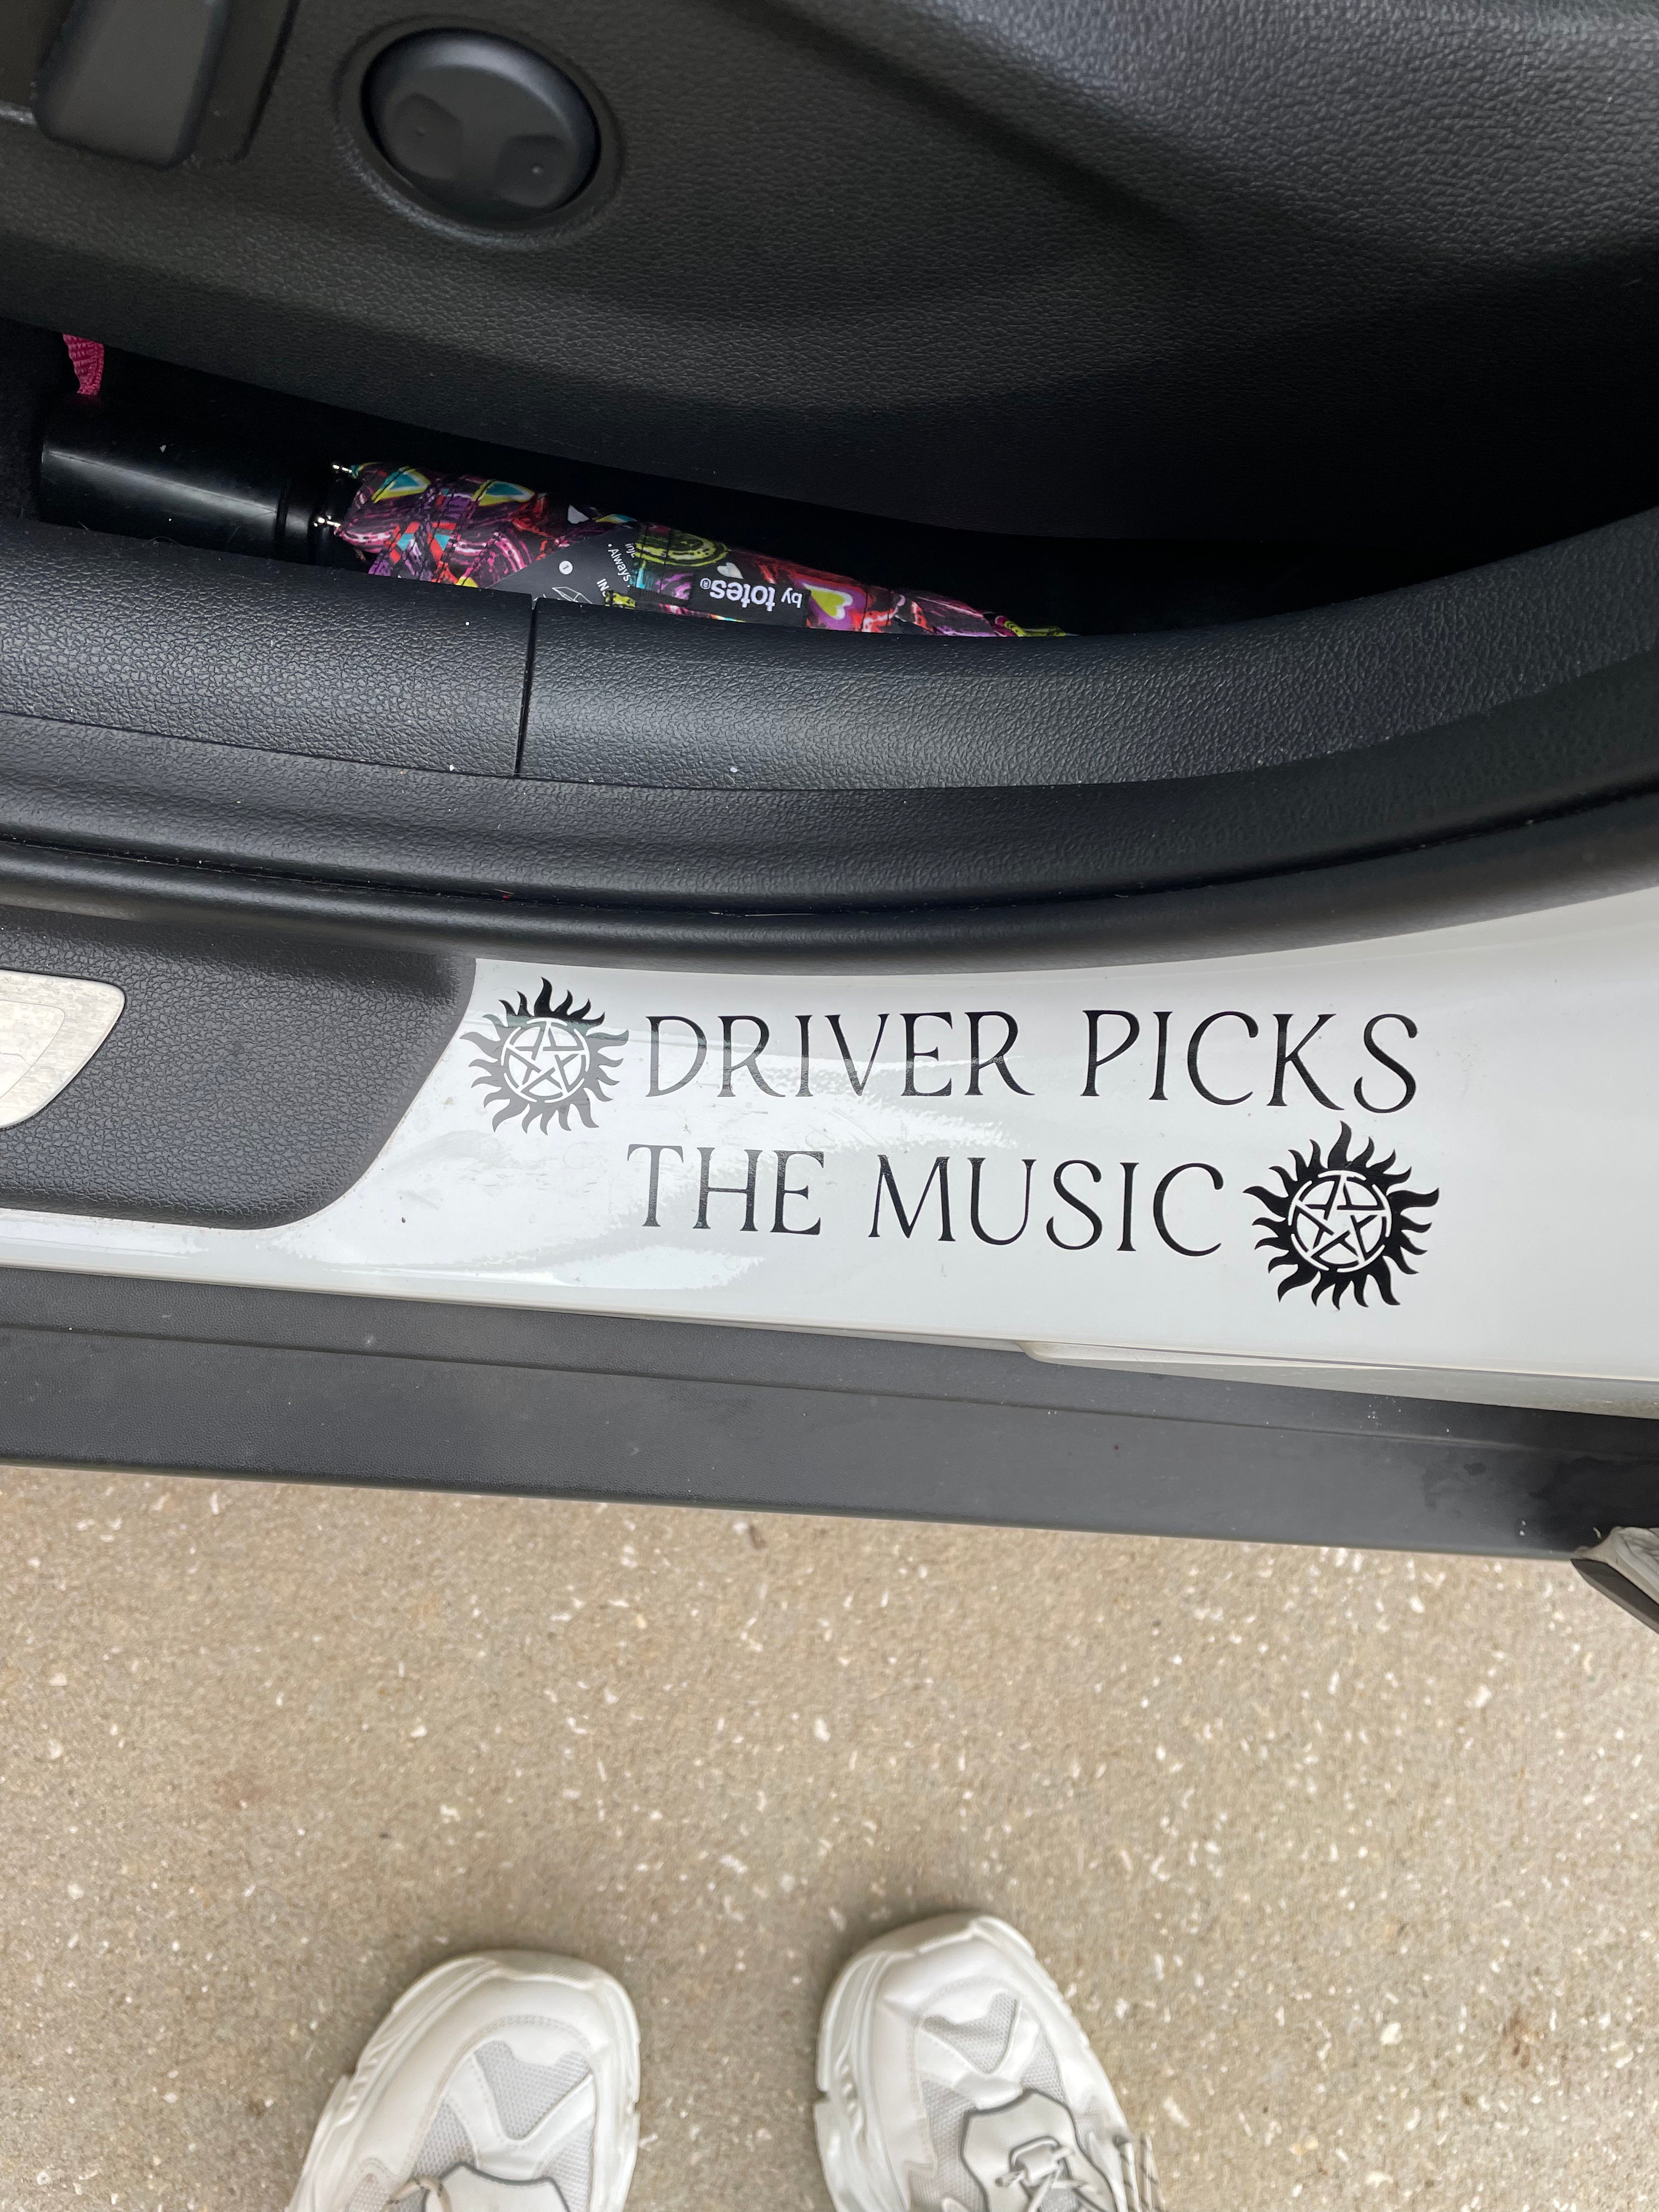 Supernatural TV Show Driver Picks the Music Car Sticker - Shotgun Shuts his Cakehole Decal with Application Instructions